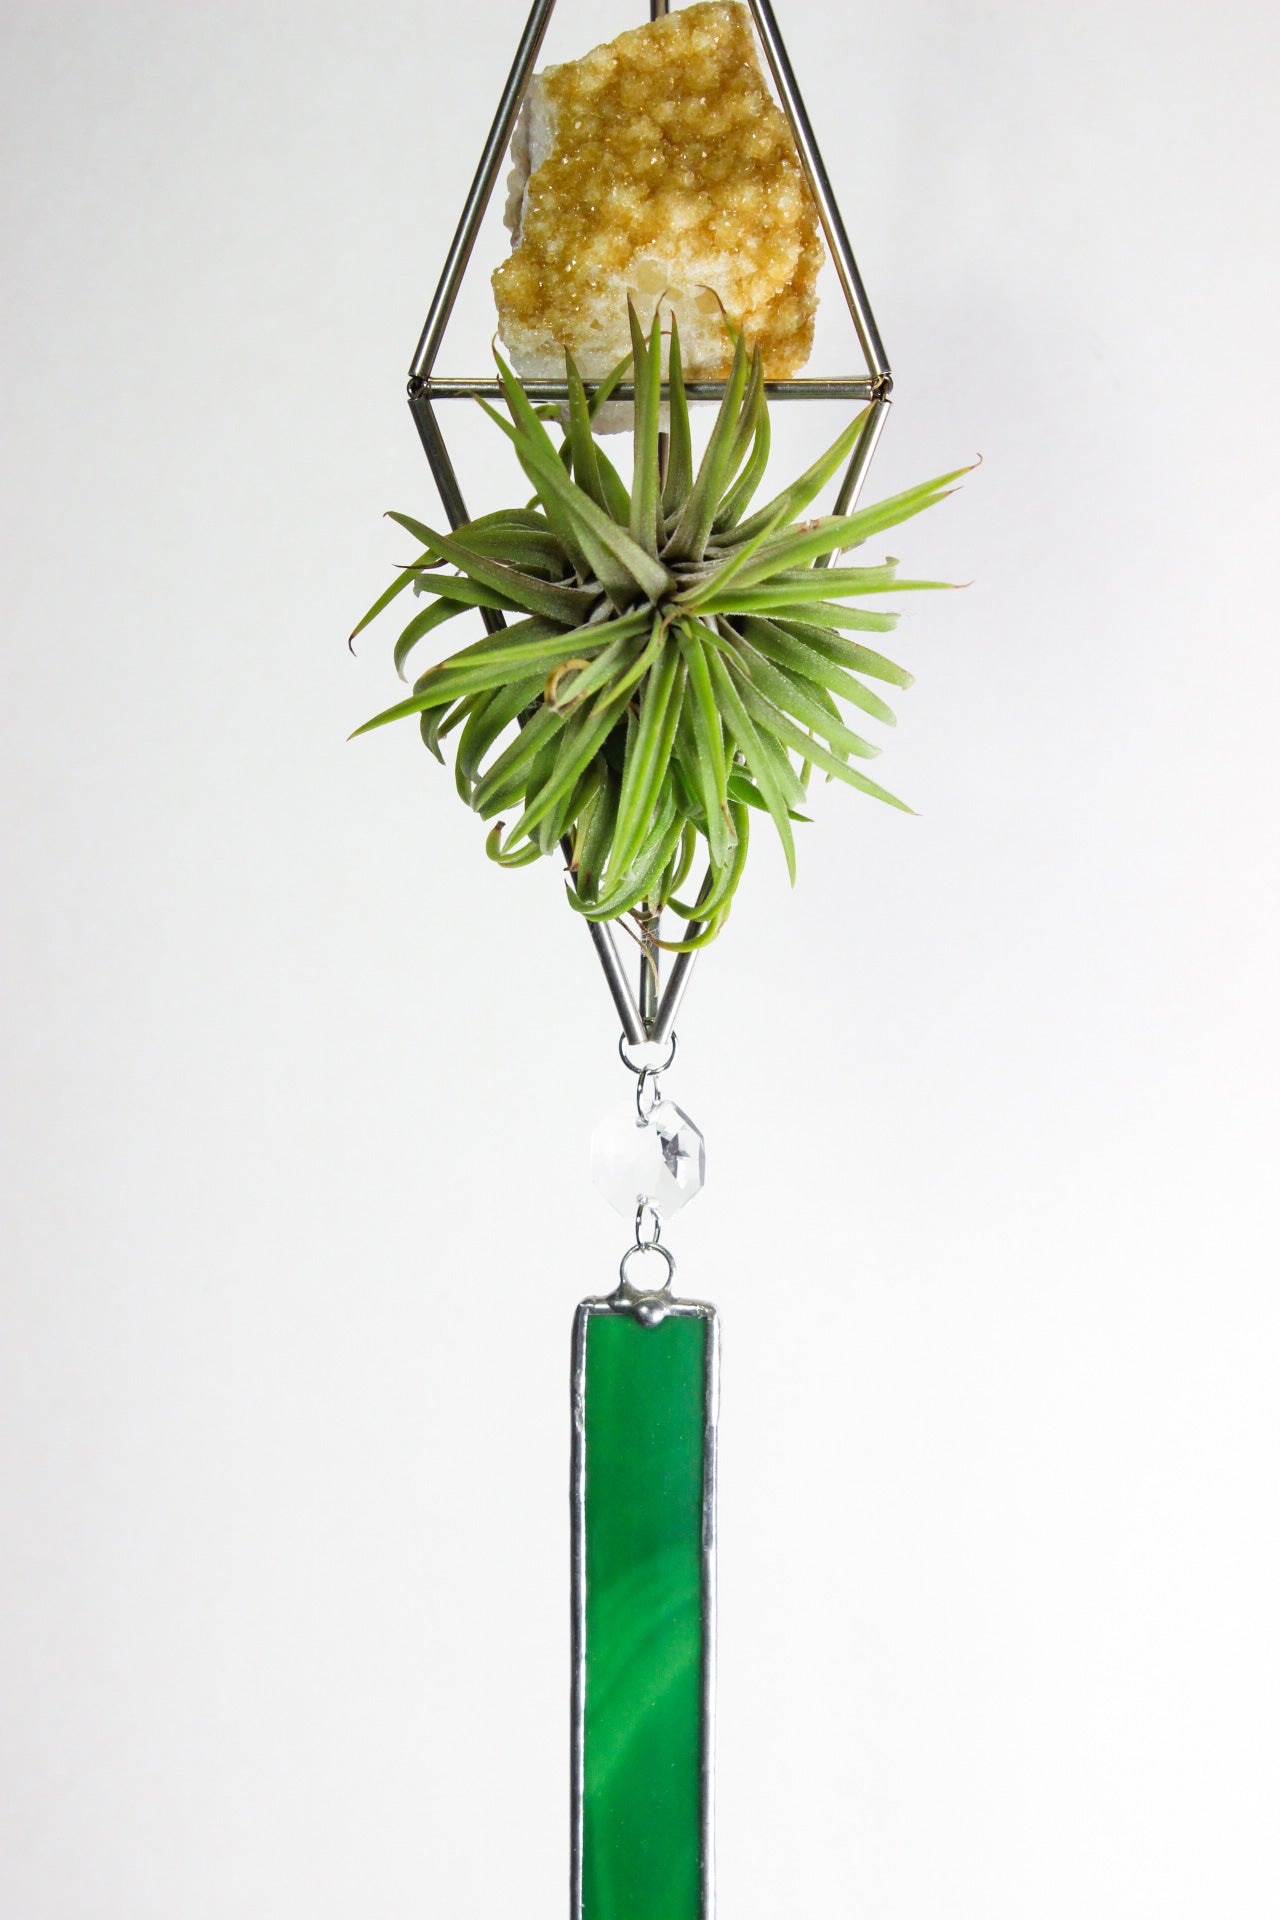 Citrine Stained Glass Sun Catcher Ornament with Airplant